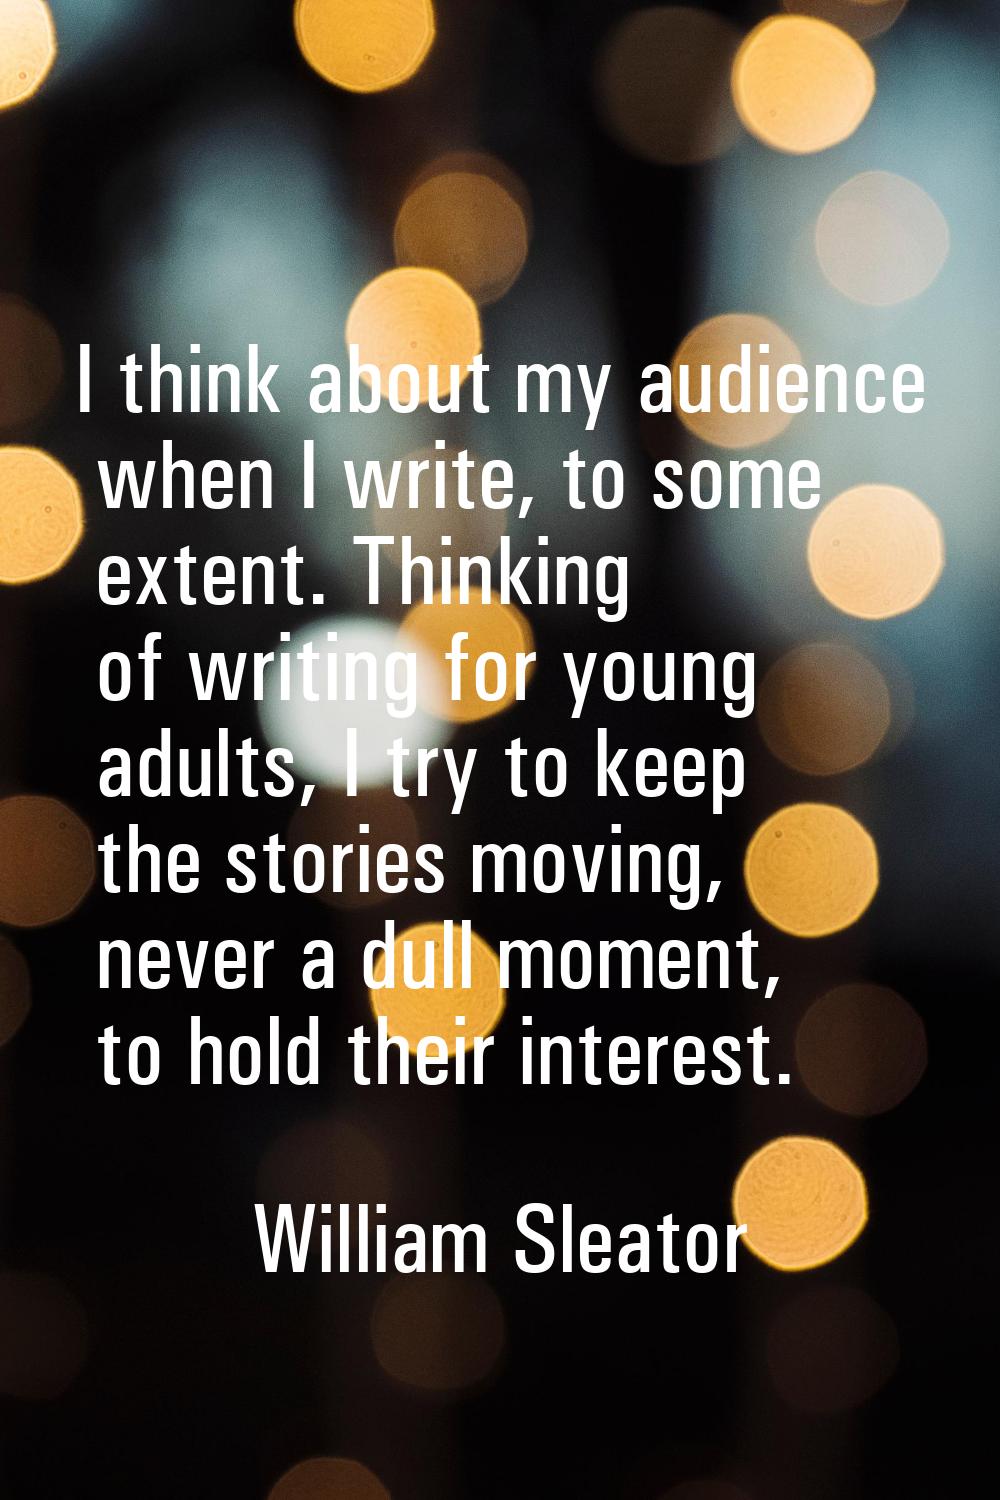 I think about my audience when I write, to some extent. Thinking of writing for young adults, I try